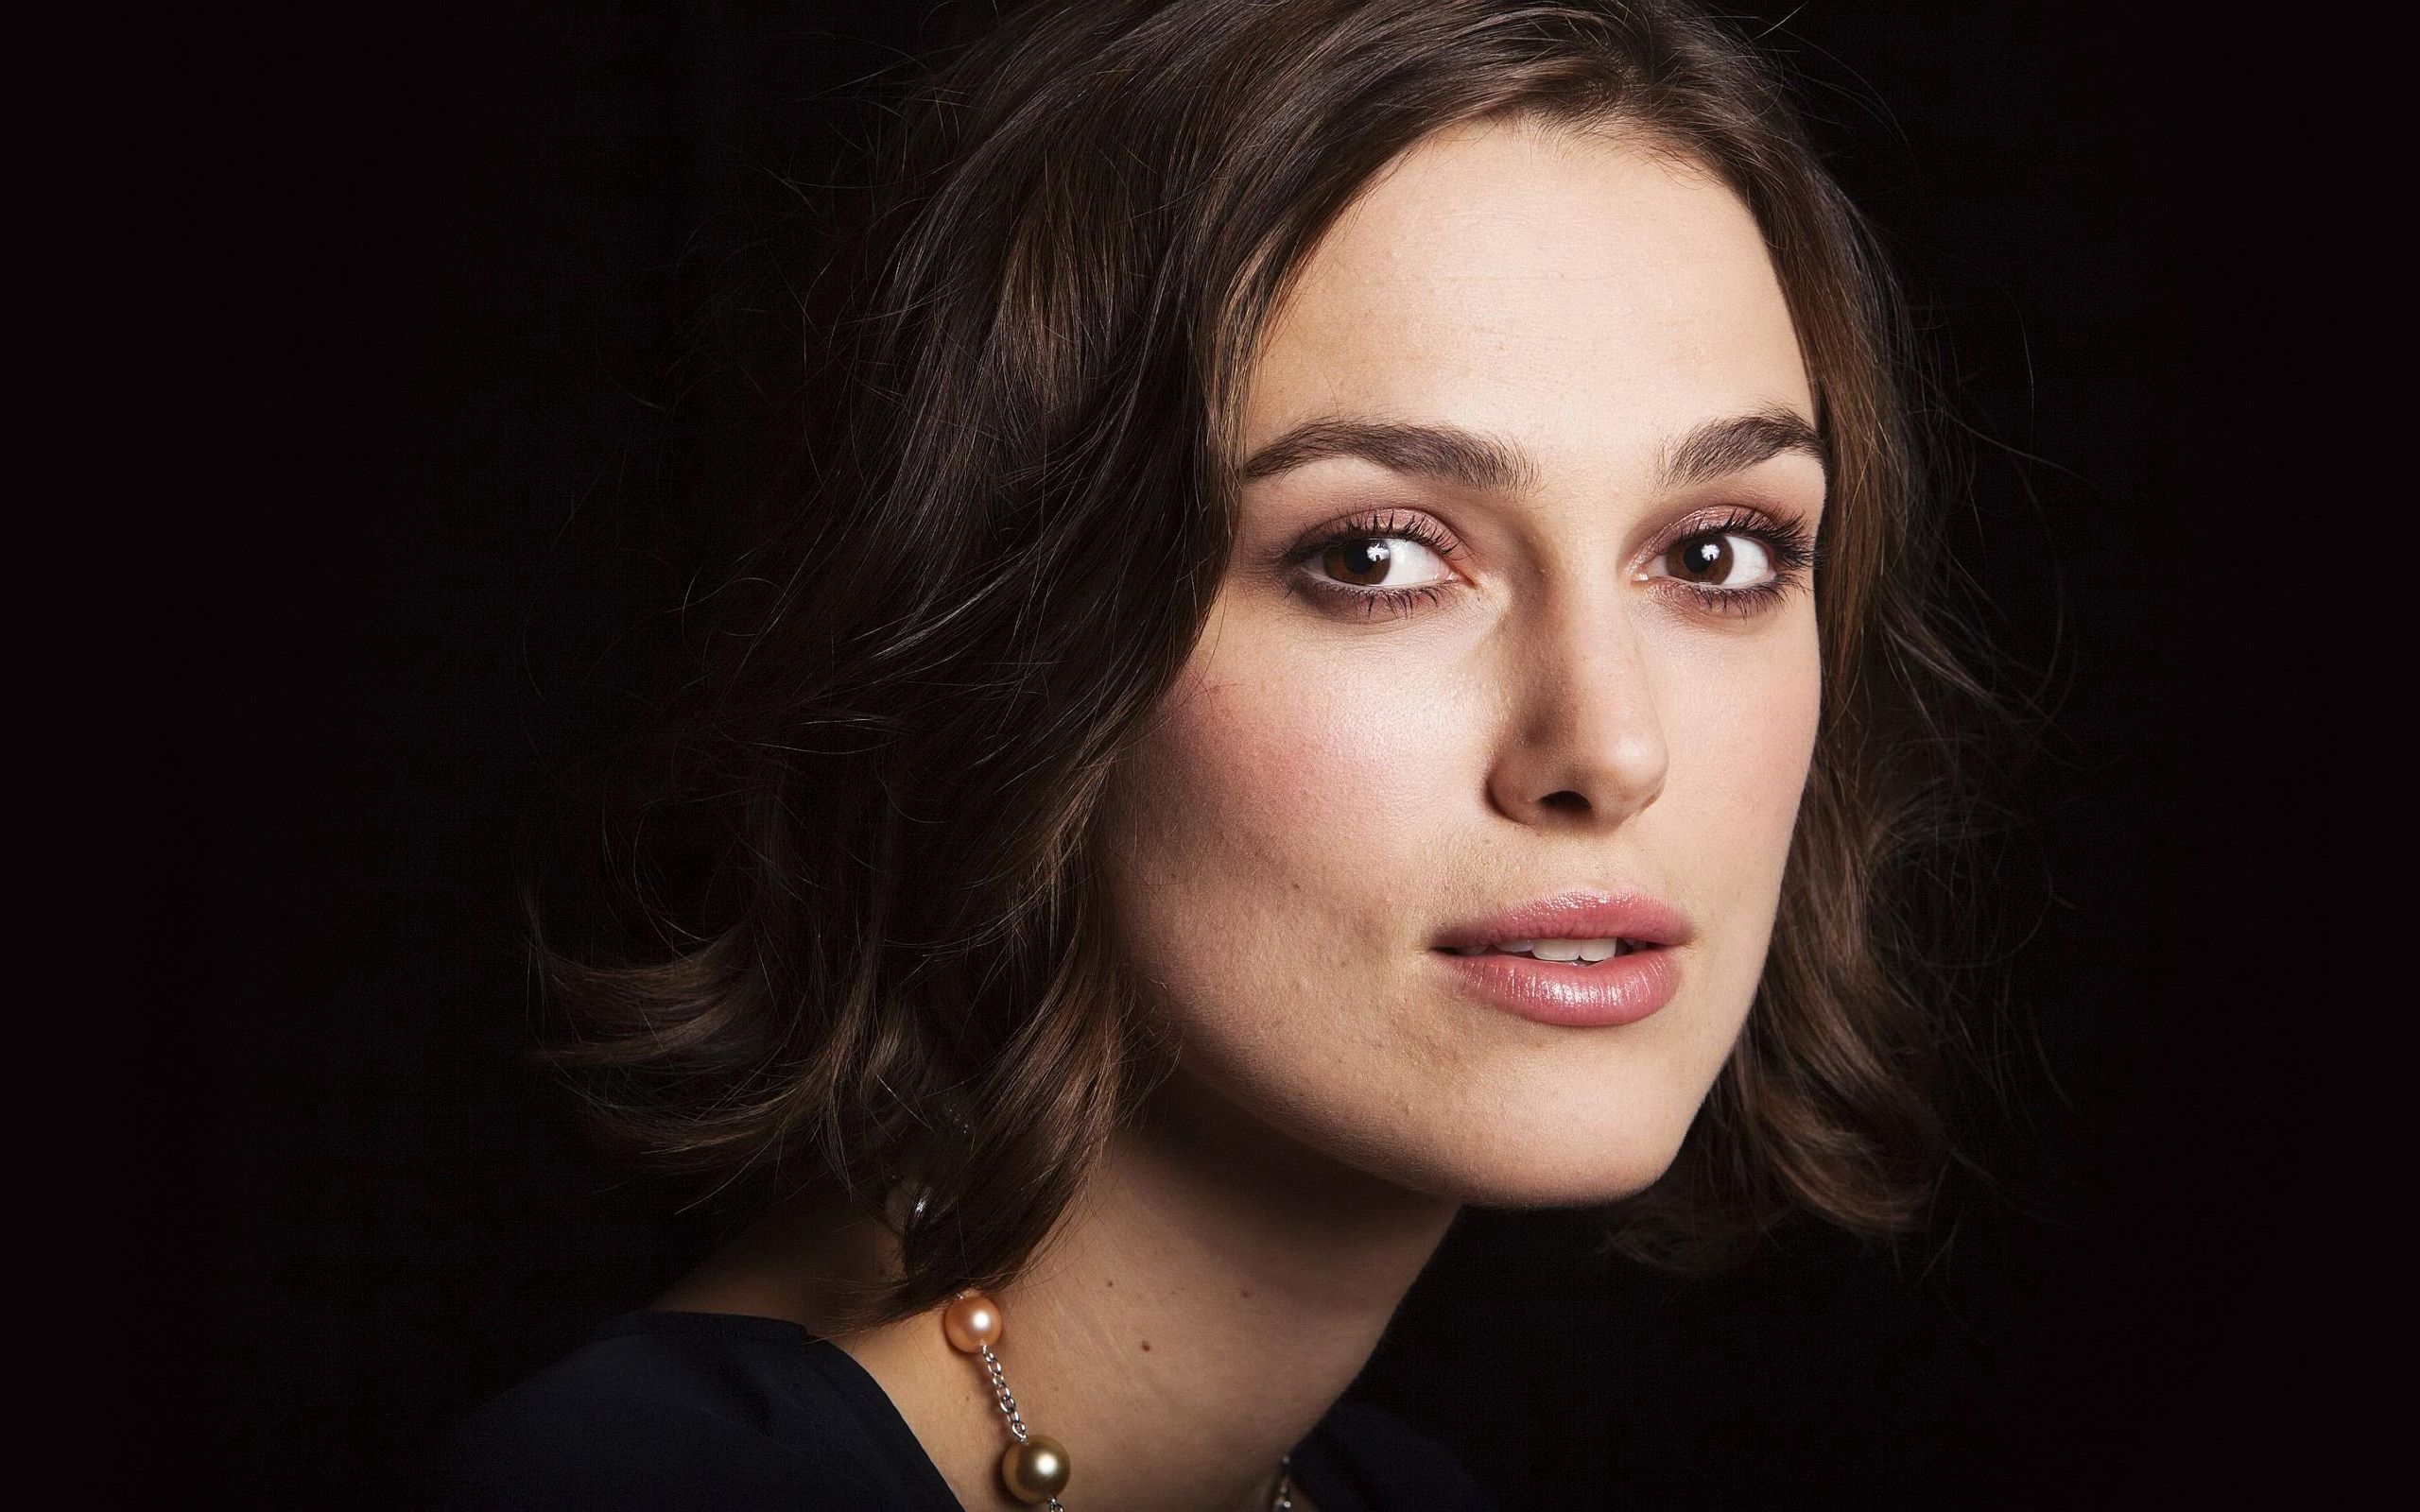 Keira Knightley Images. 